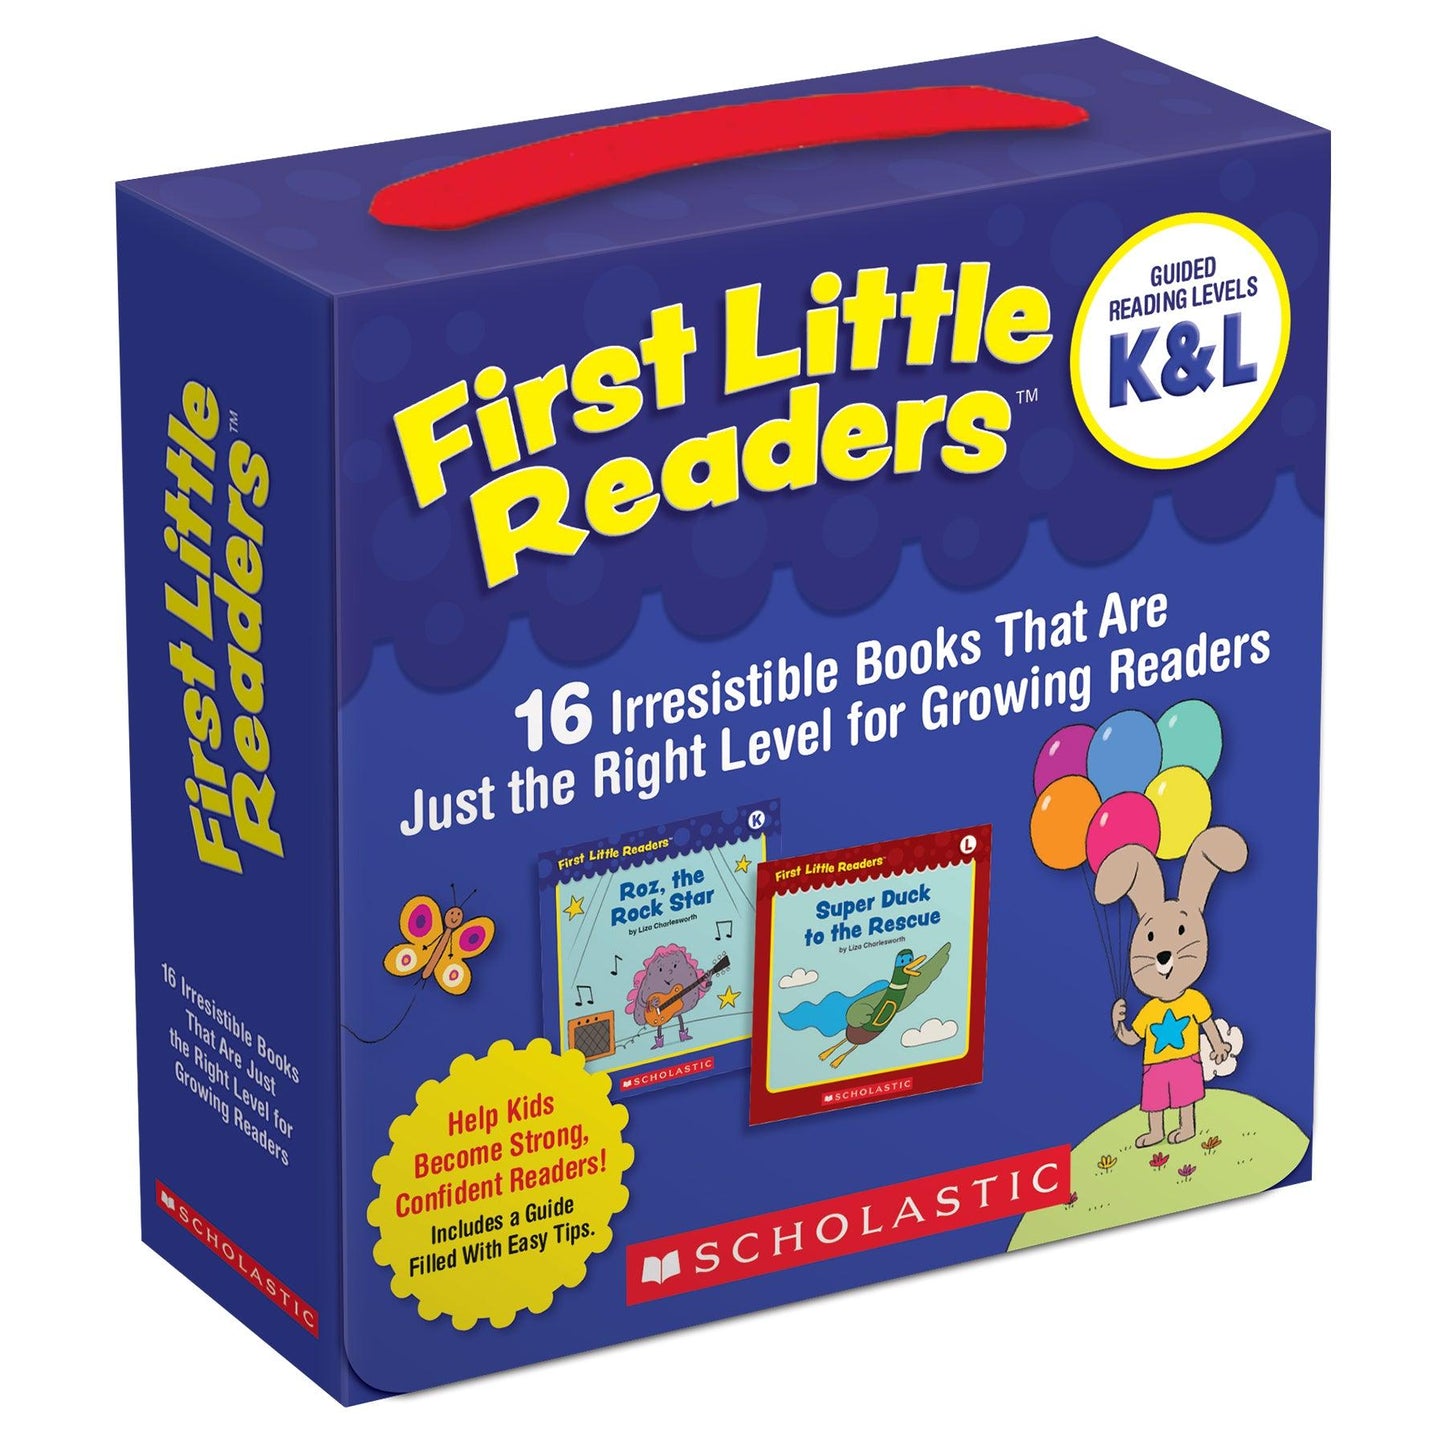 First Little Readers: Guided Reading Levels K & L (Single-Copy Set) - Loomini